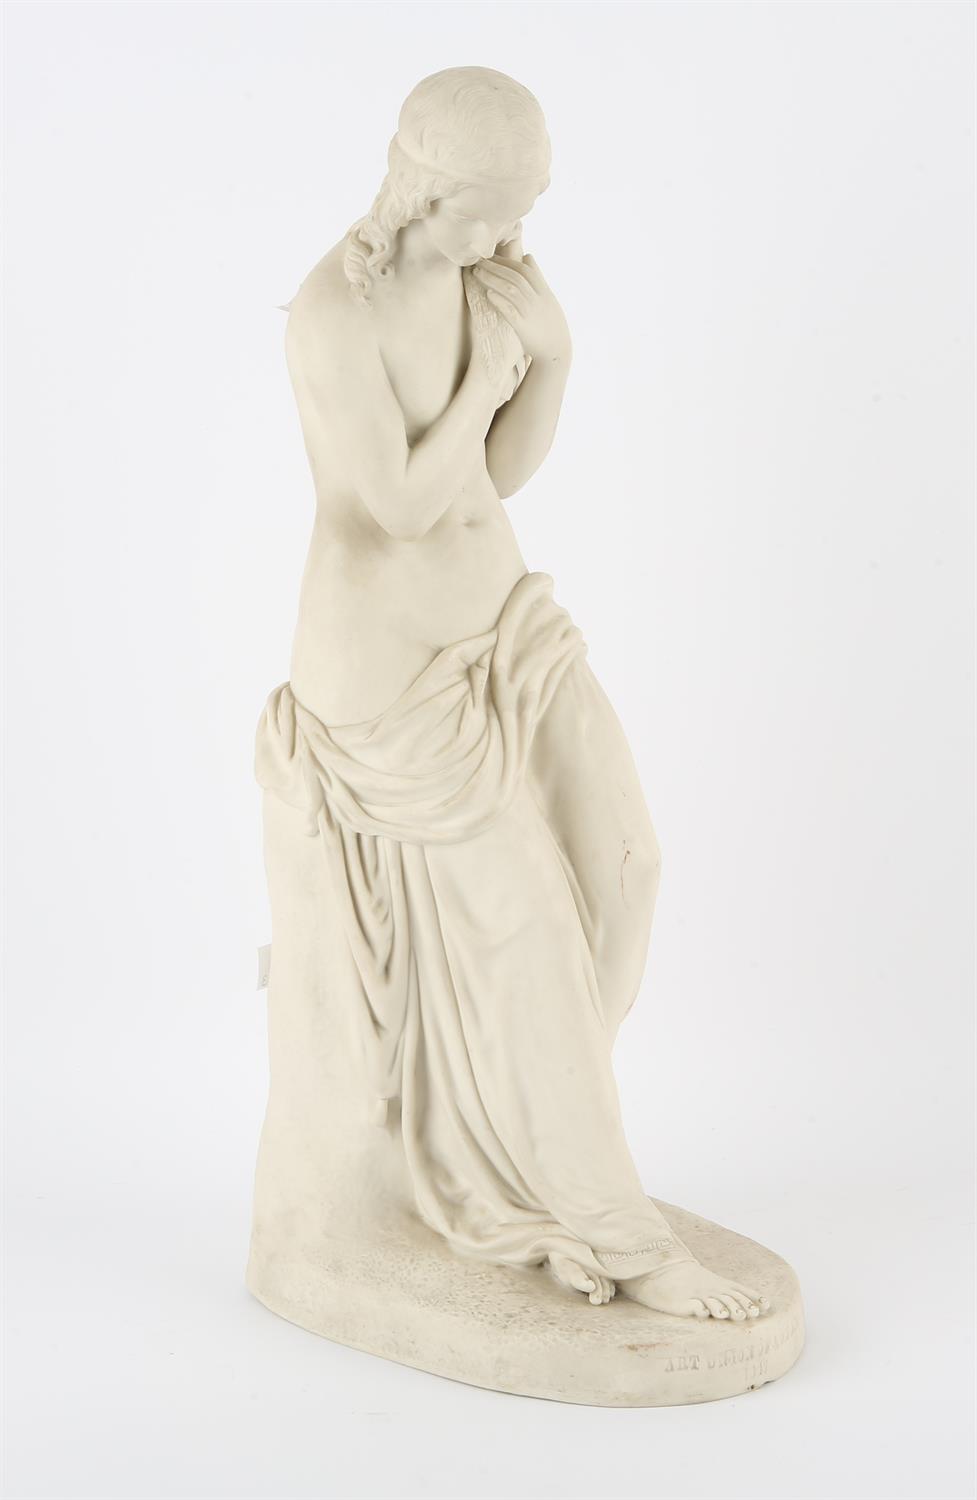 W. T. COPELAND FOR THE ART UNION OF LONDON, a Parian figure of Innocence after J.T.